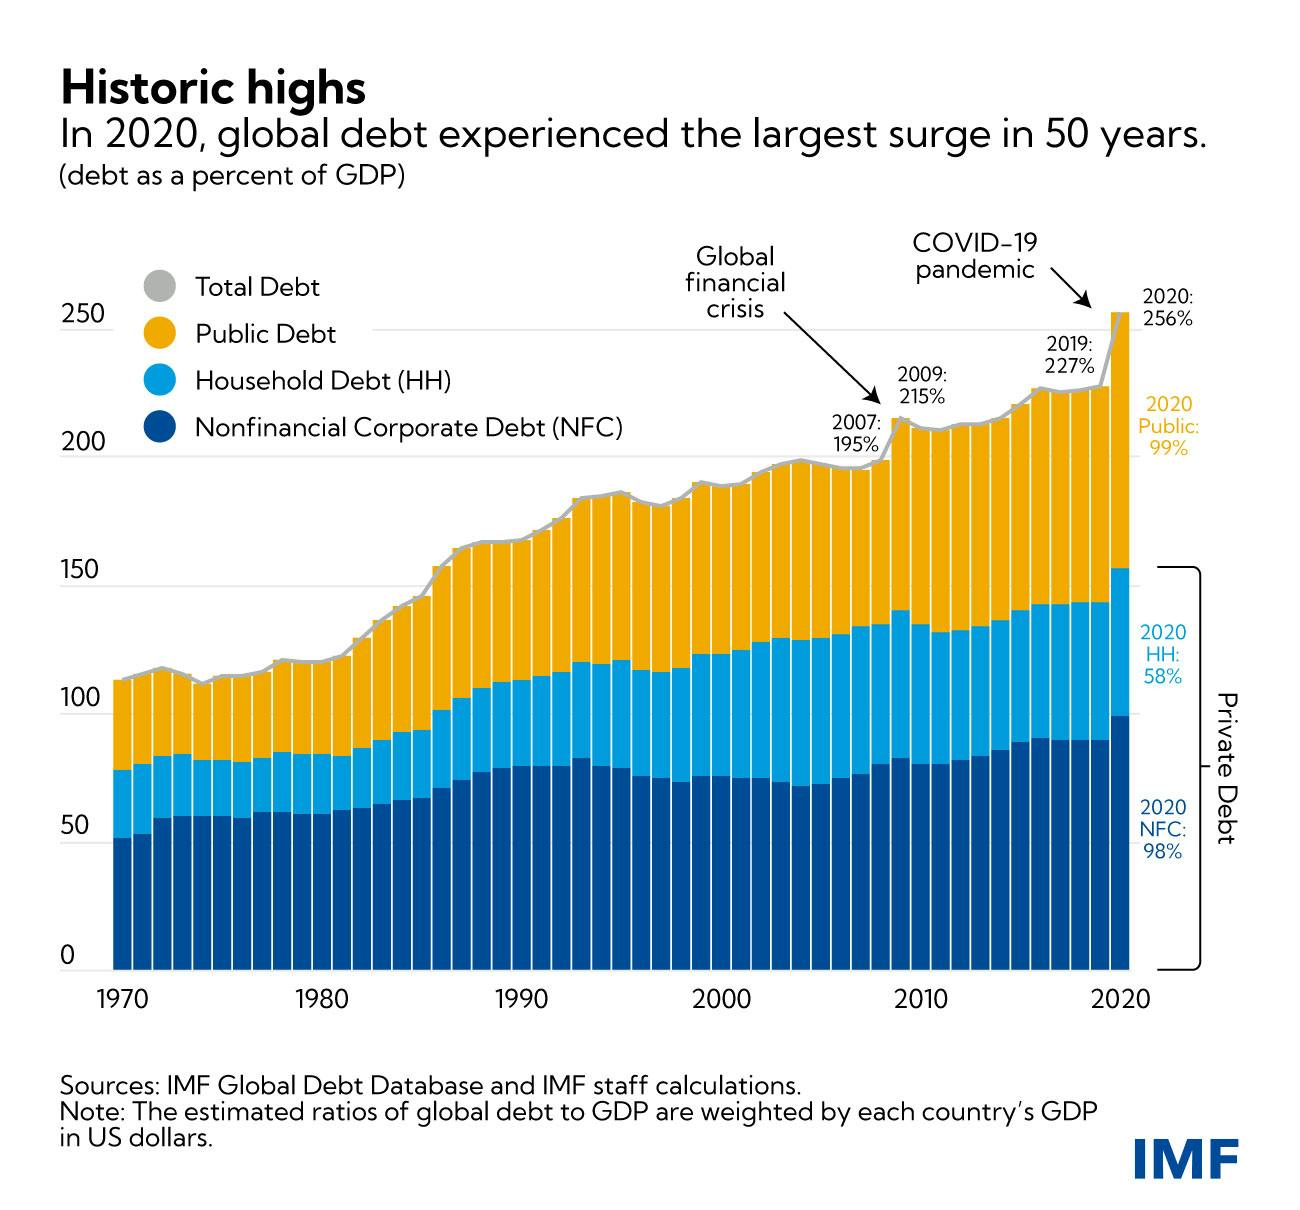 Global debt is a vital indicator of world economic health. While high debt suggests growth investment, it also signals financial risk and unsustainability. Unchecked increases or unsustainable debt levels can warn of potential economic problems and vulnerabilities on a global scale. In recent years, global debt continuously shatters record after record. Source: Infographic (https://www.imf.org/en/Blogs/Articles/2021/12/15/blog-global-debt-reaches-a-record-226-trillion) by the International Monetary Fund (https://www.imf.org/en/Blogs), used under a fair use rationale.